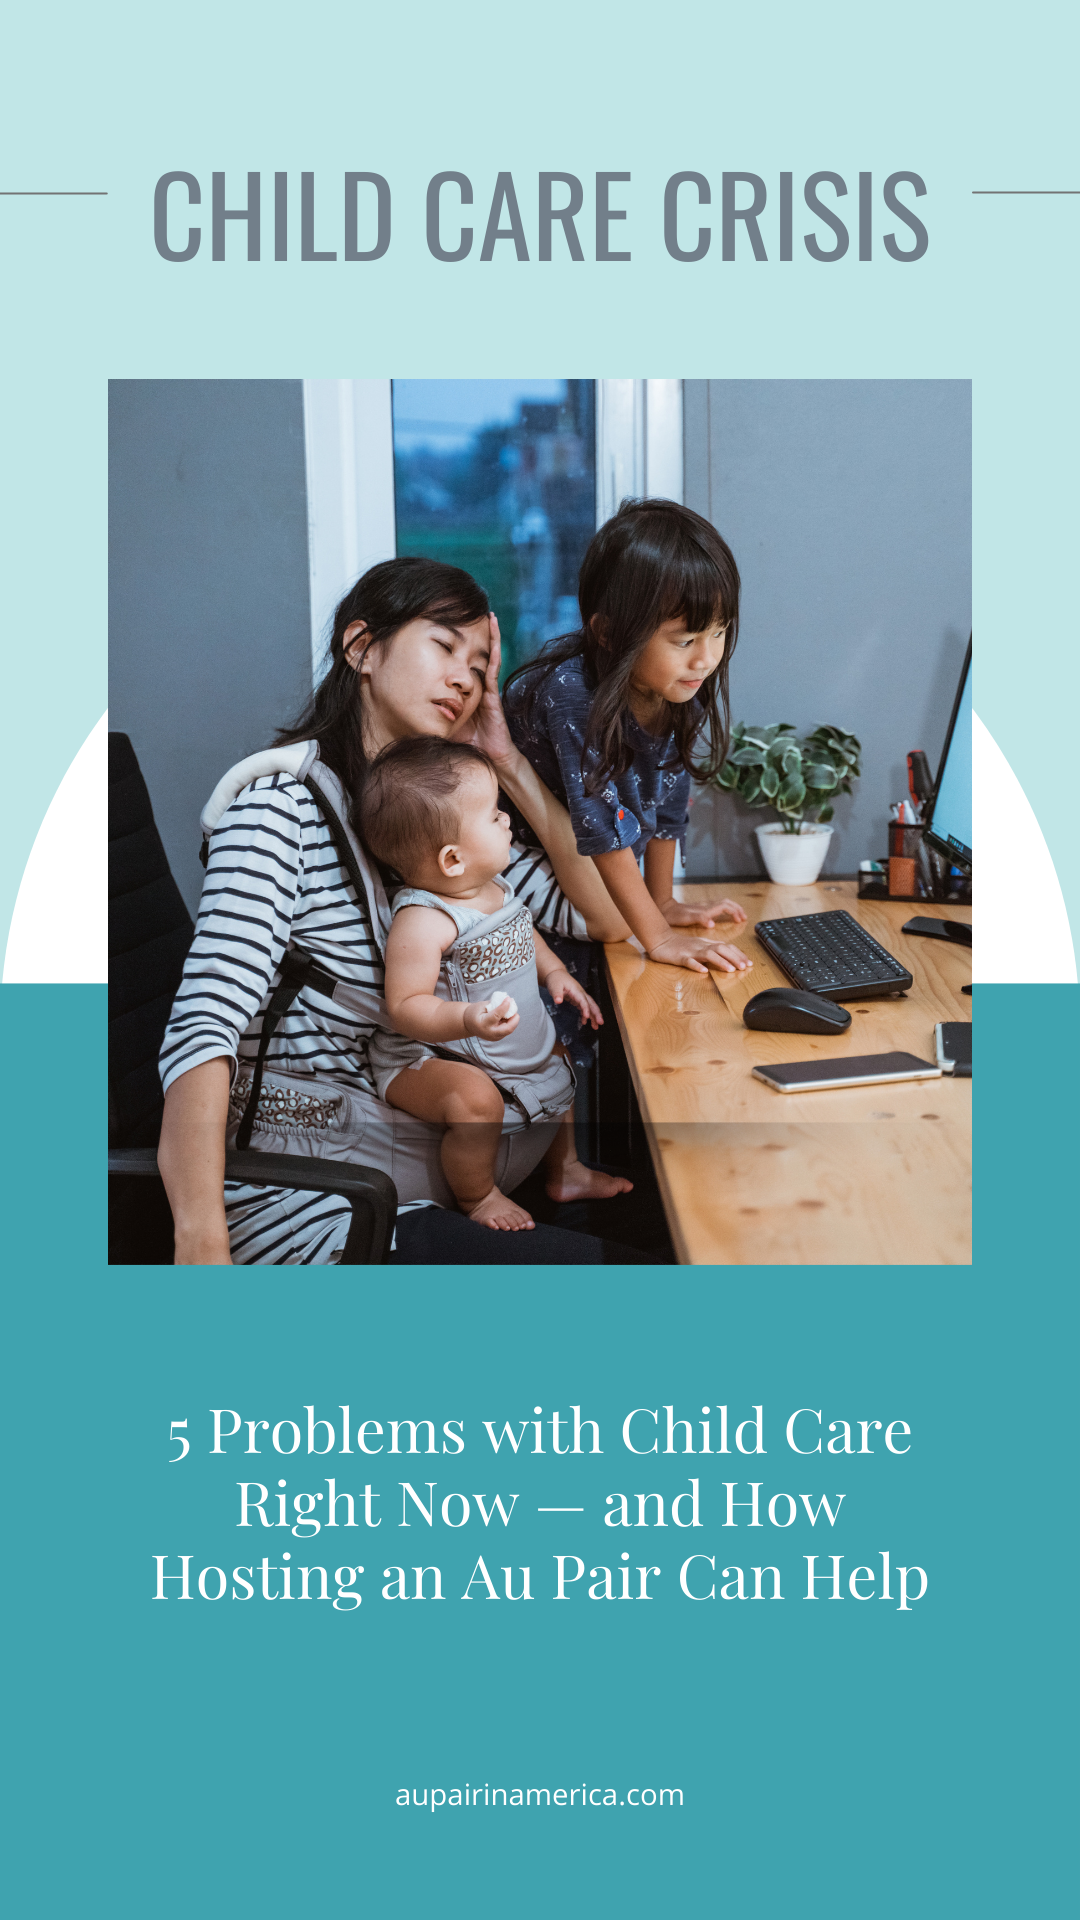 Problems with Child Care | Child Care Crisis | Au Pair in America